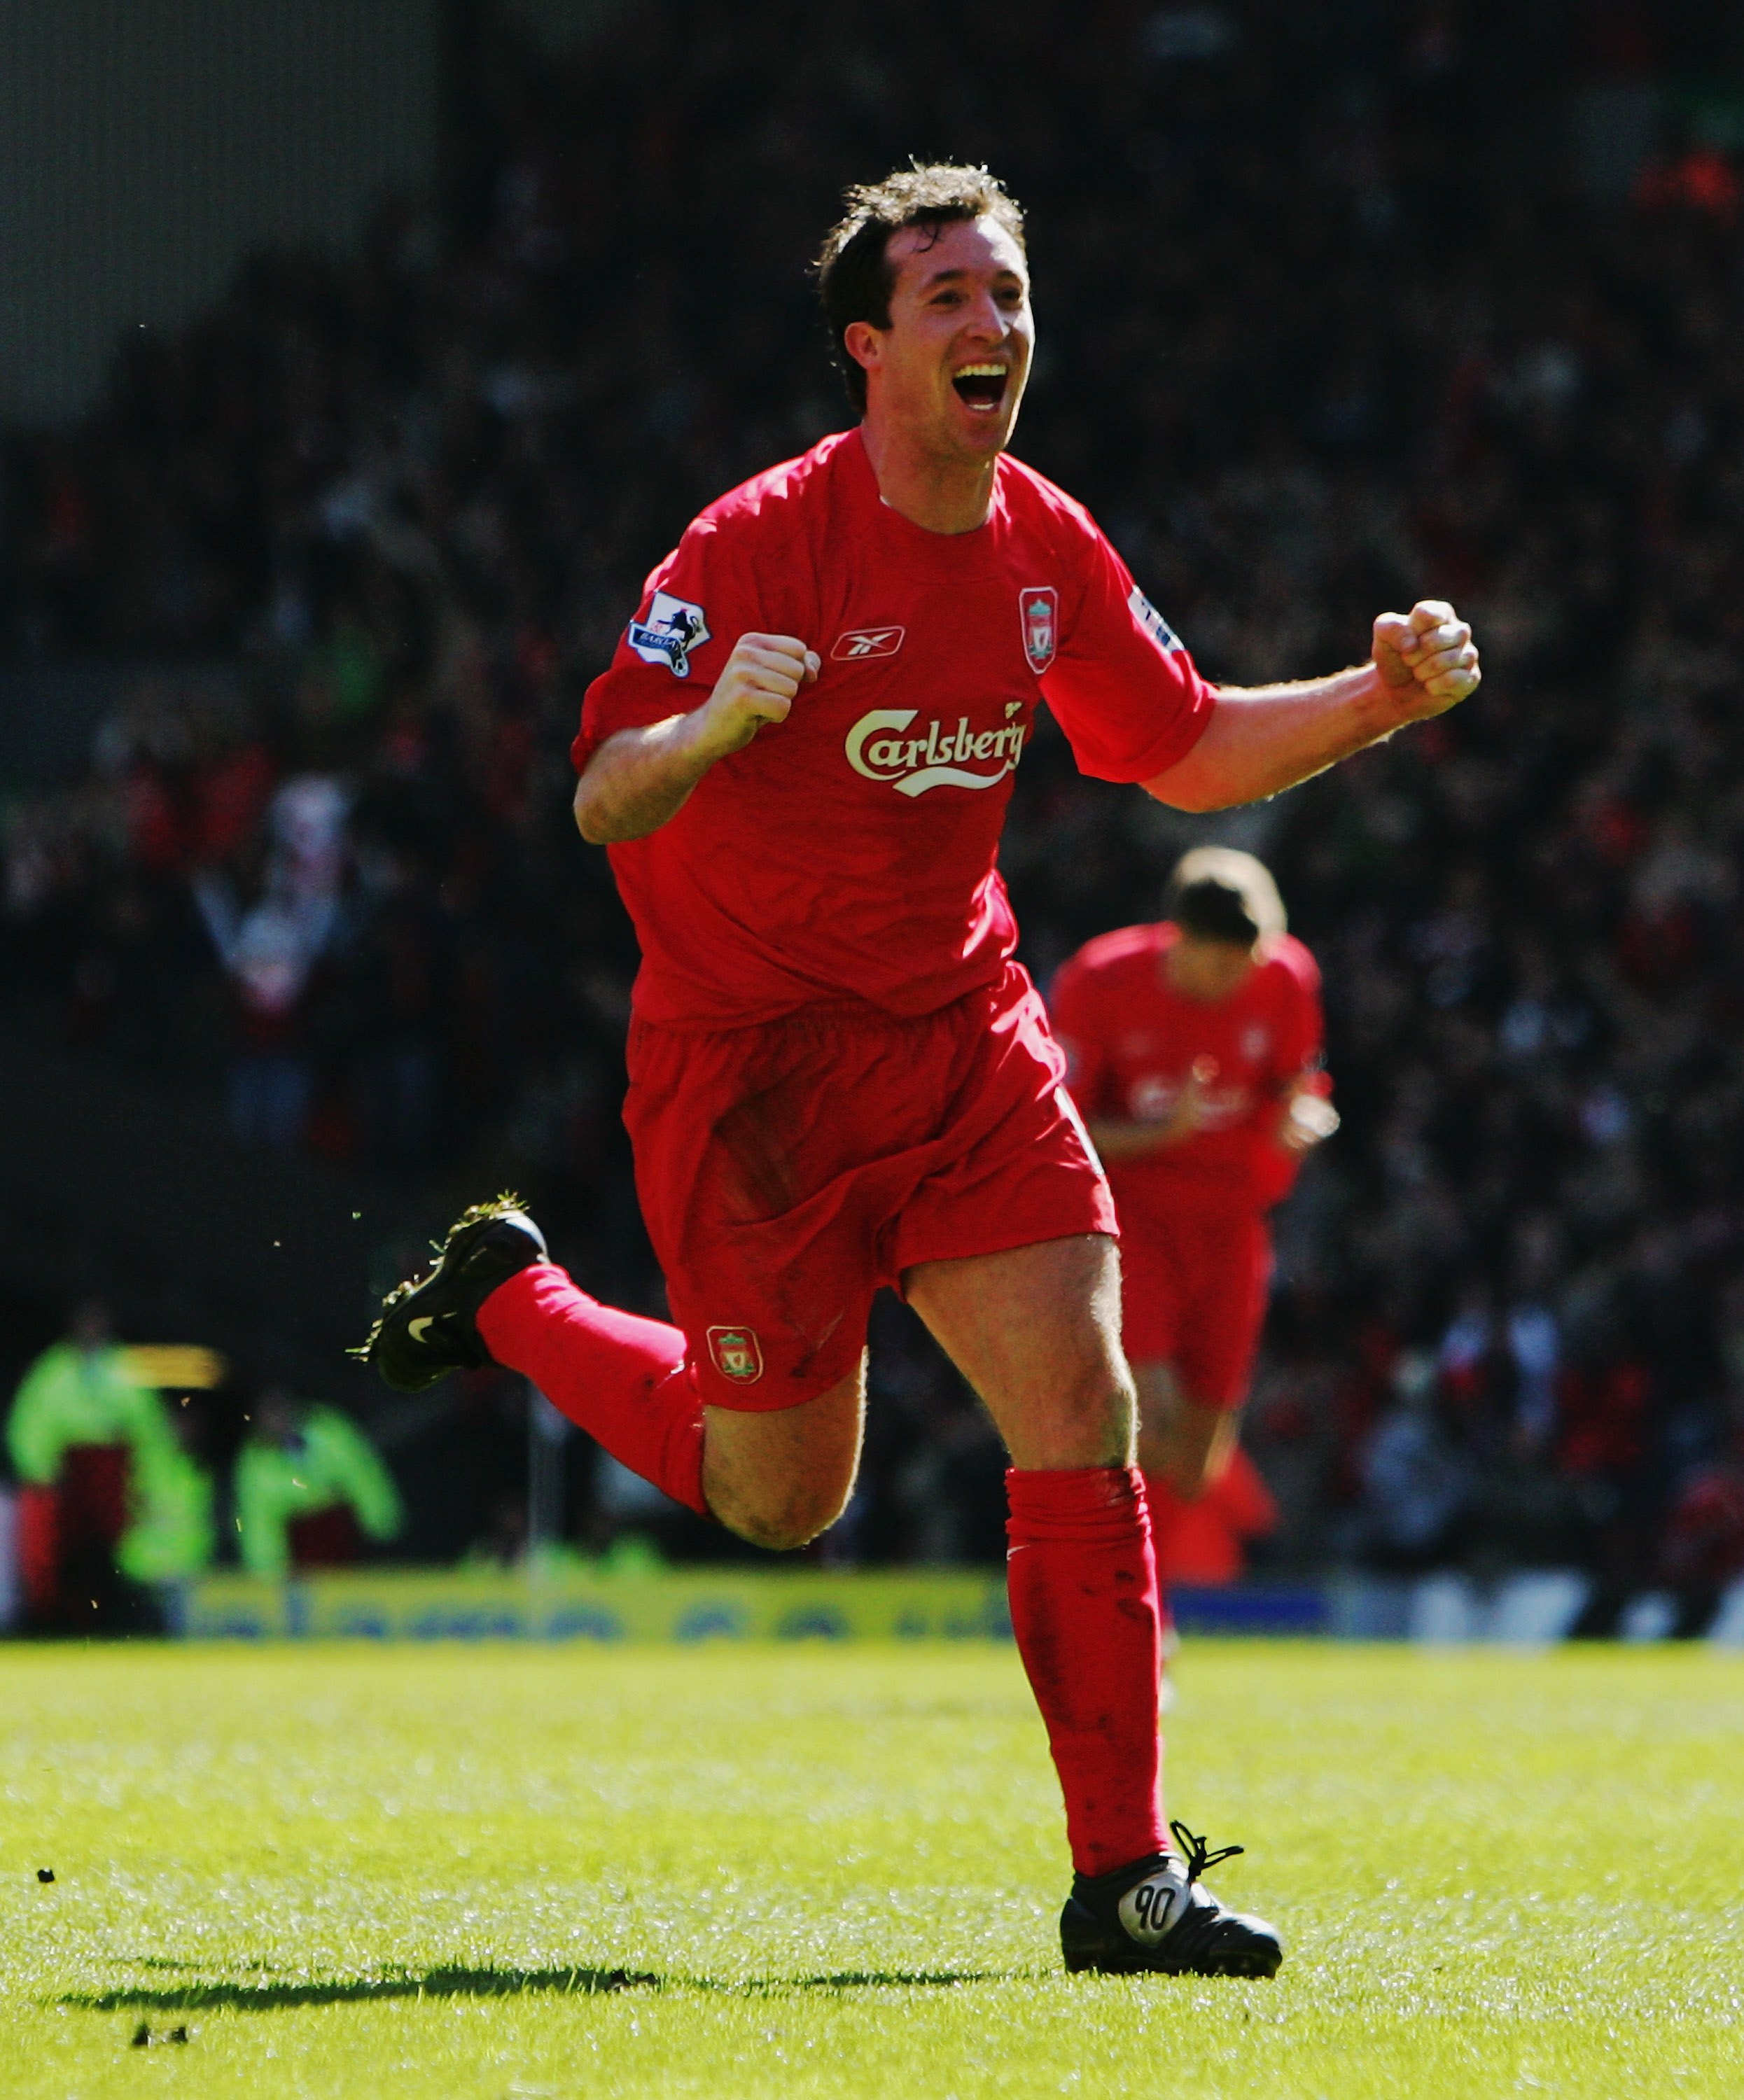 LIVERPOOL, UNITED KINGDOM - APRIL 09:  Robbie Fowler of Liverpool celebrates scoring the opening goal during the Barclays Premiership match between Liverpool and Bolton Wanderers at Anfield on April 9, 2006 in Liverpool, England.  (Photo by Laurence Griff